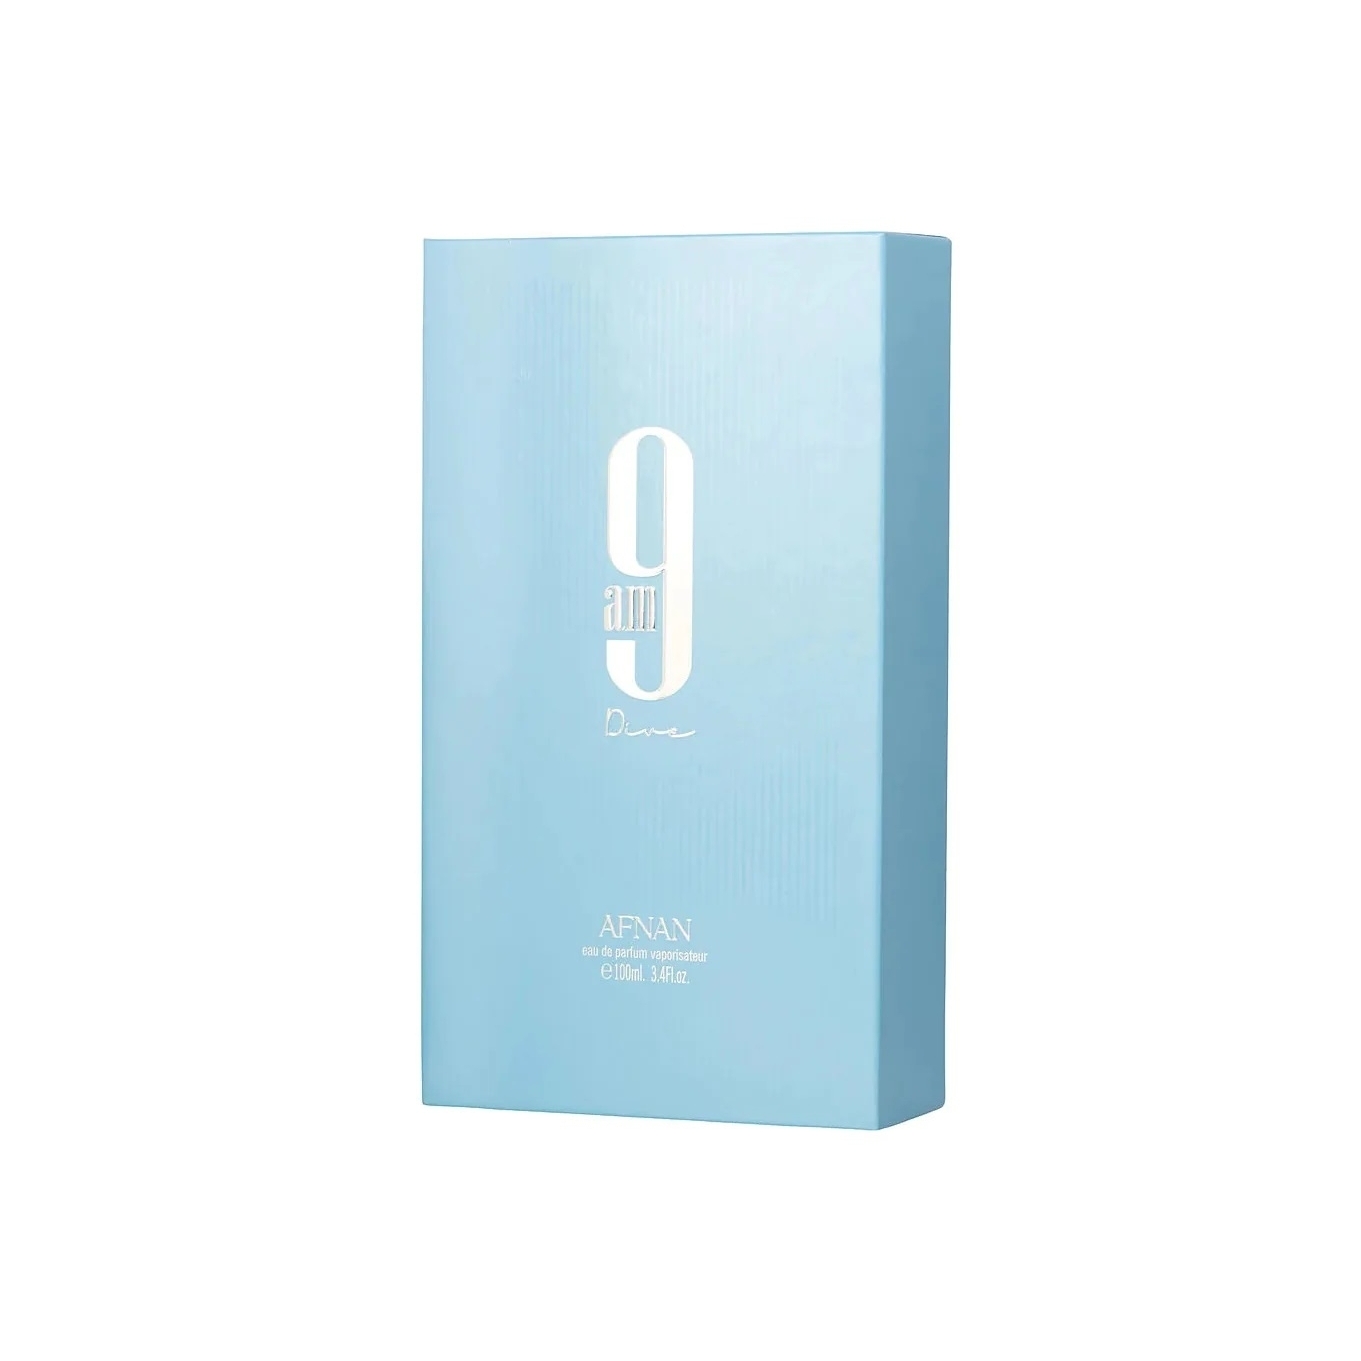 9 Am Dive By Afnan EDP Spray 3.4 Oz For Women